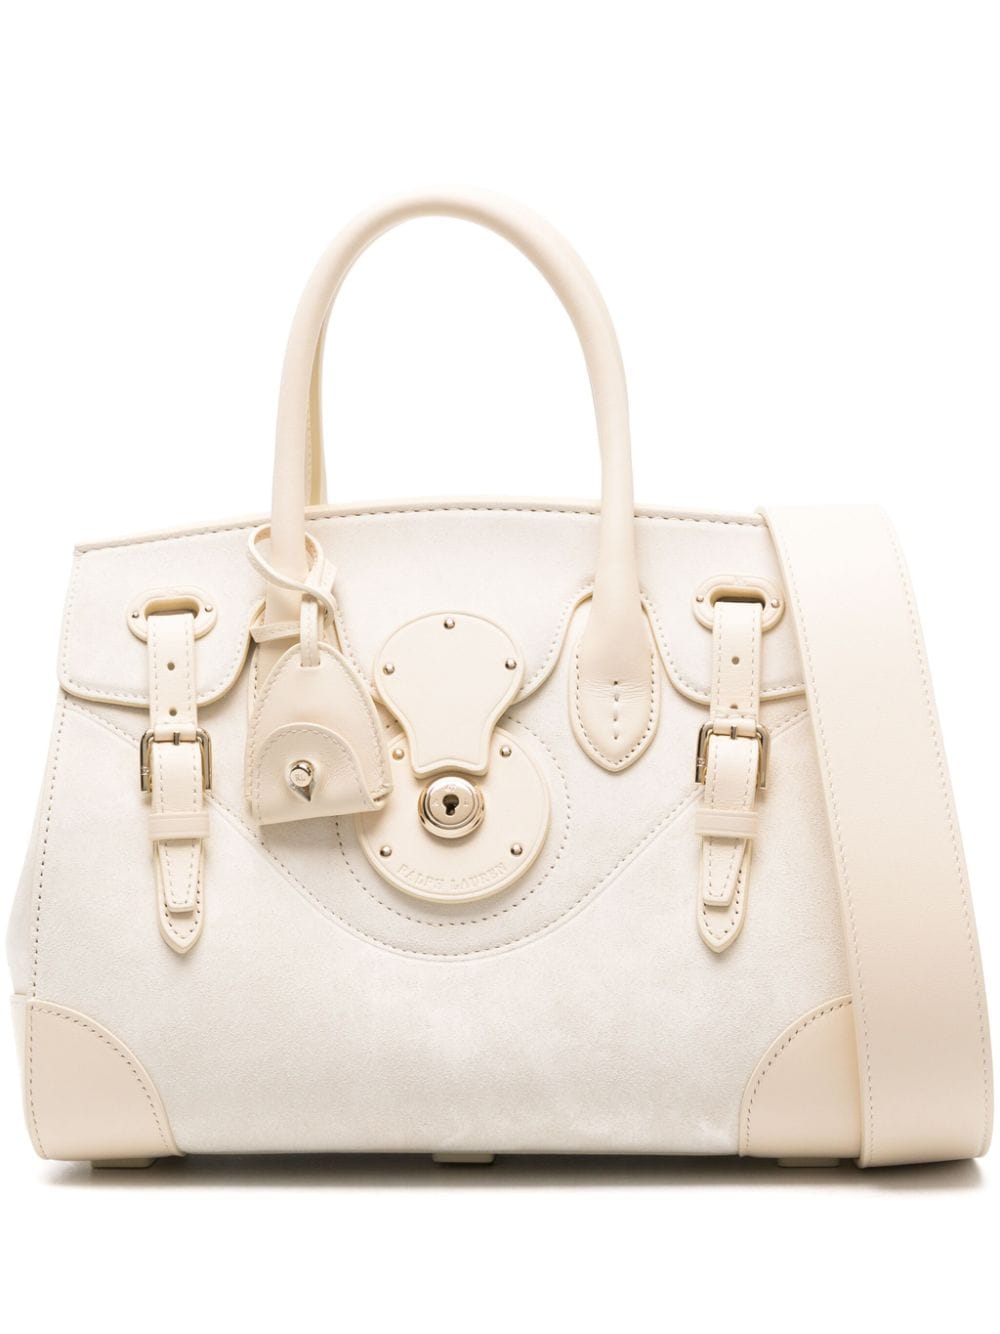 Ralph Lauren Collection Ricky suede tote bag - White von Ralph Lauren Collection